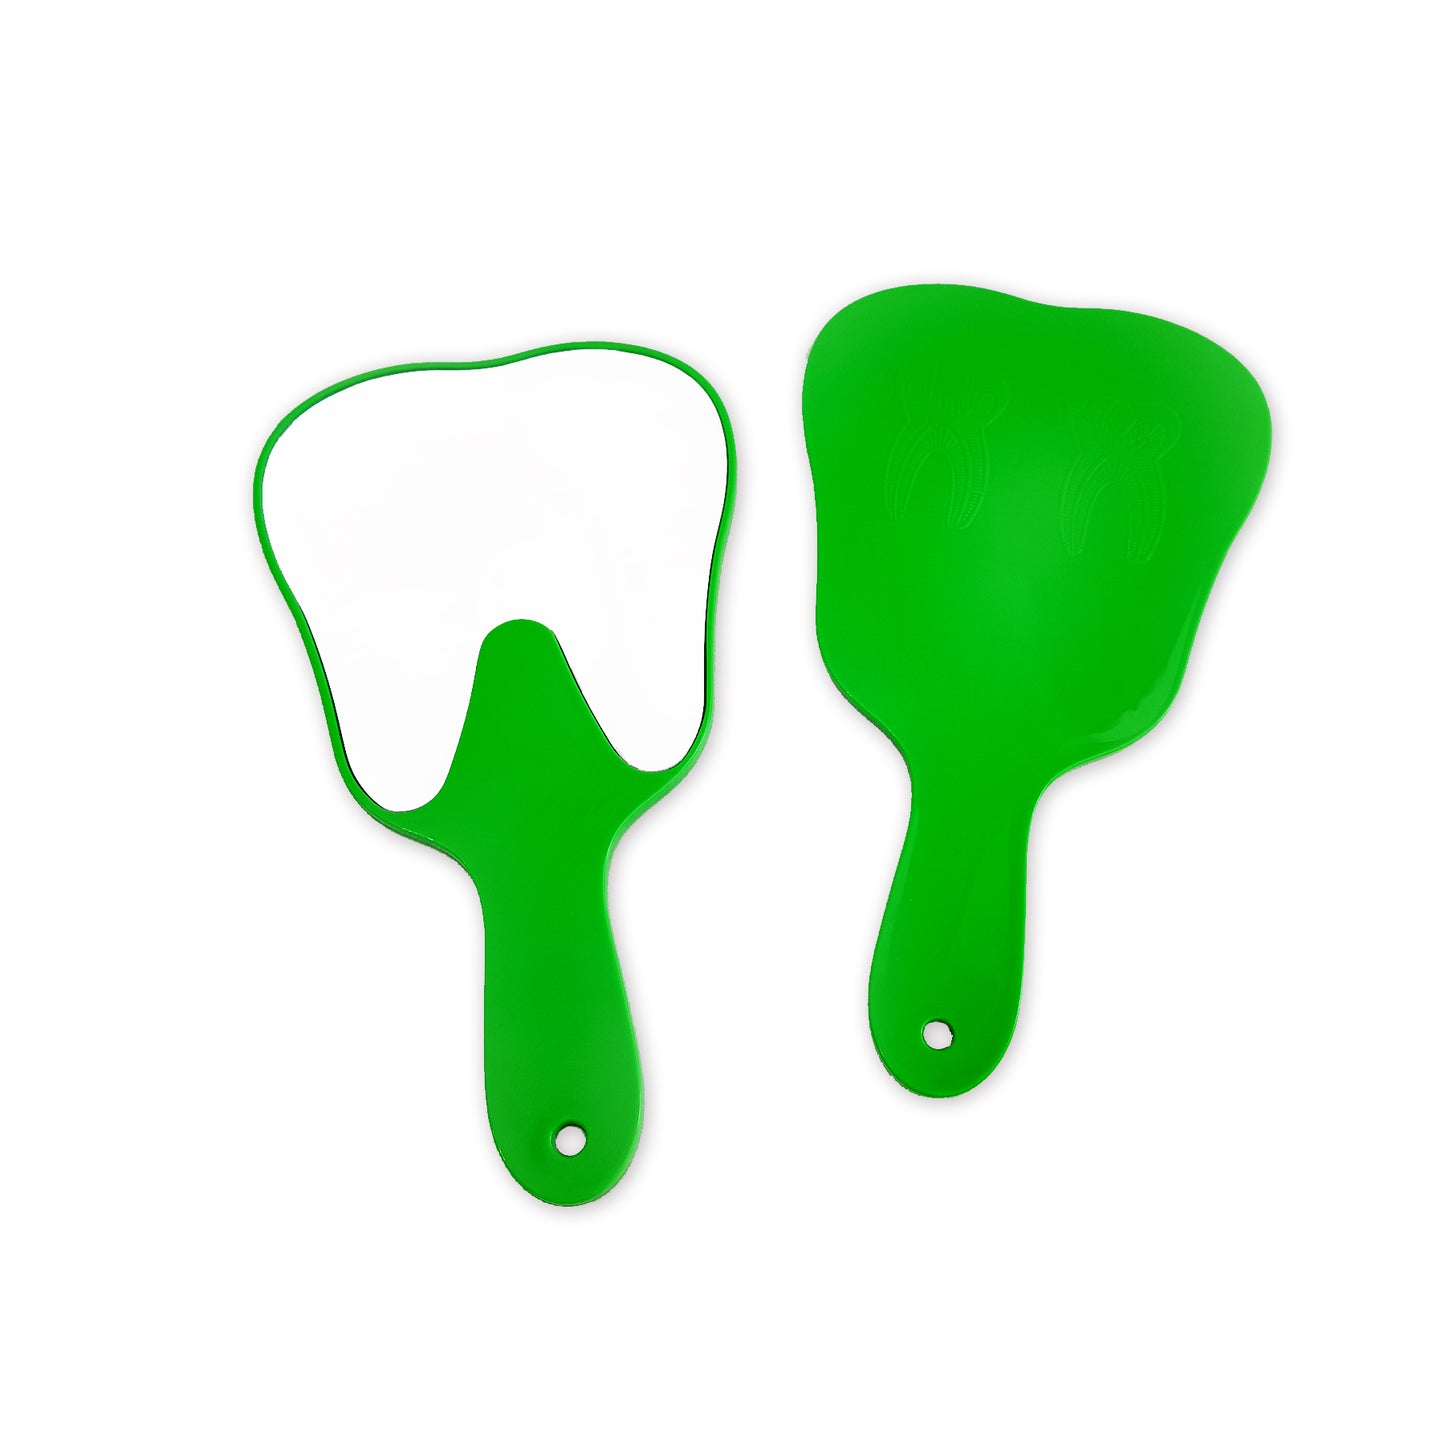 Tooth shaped mirror in different colors